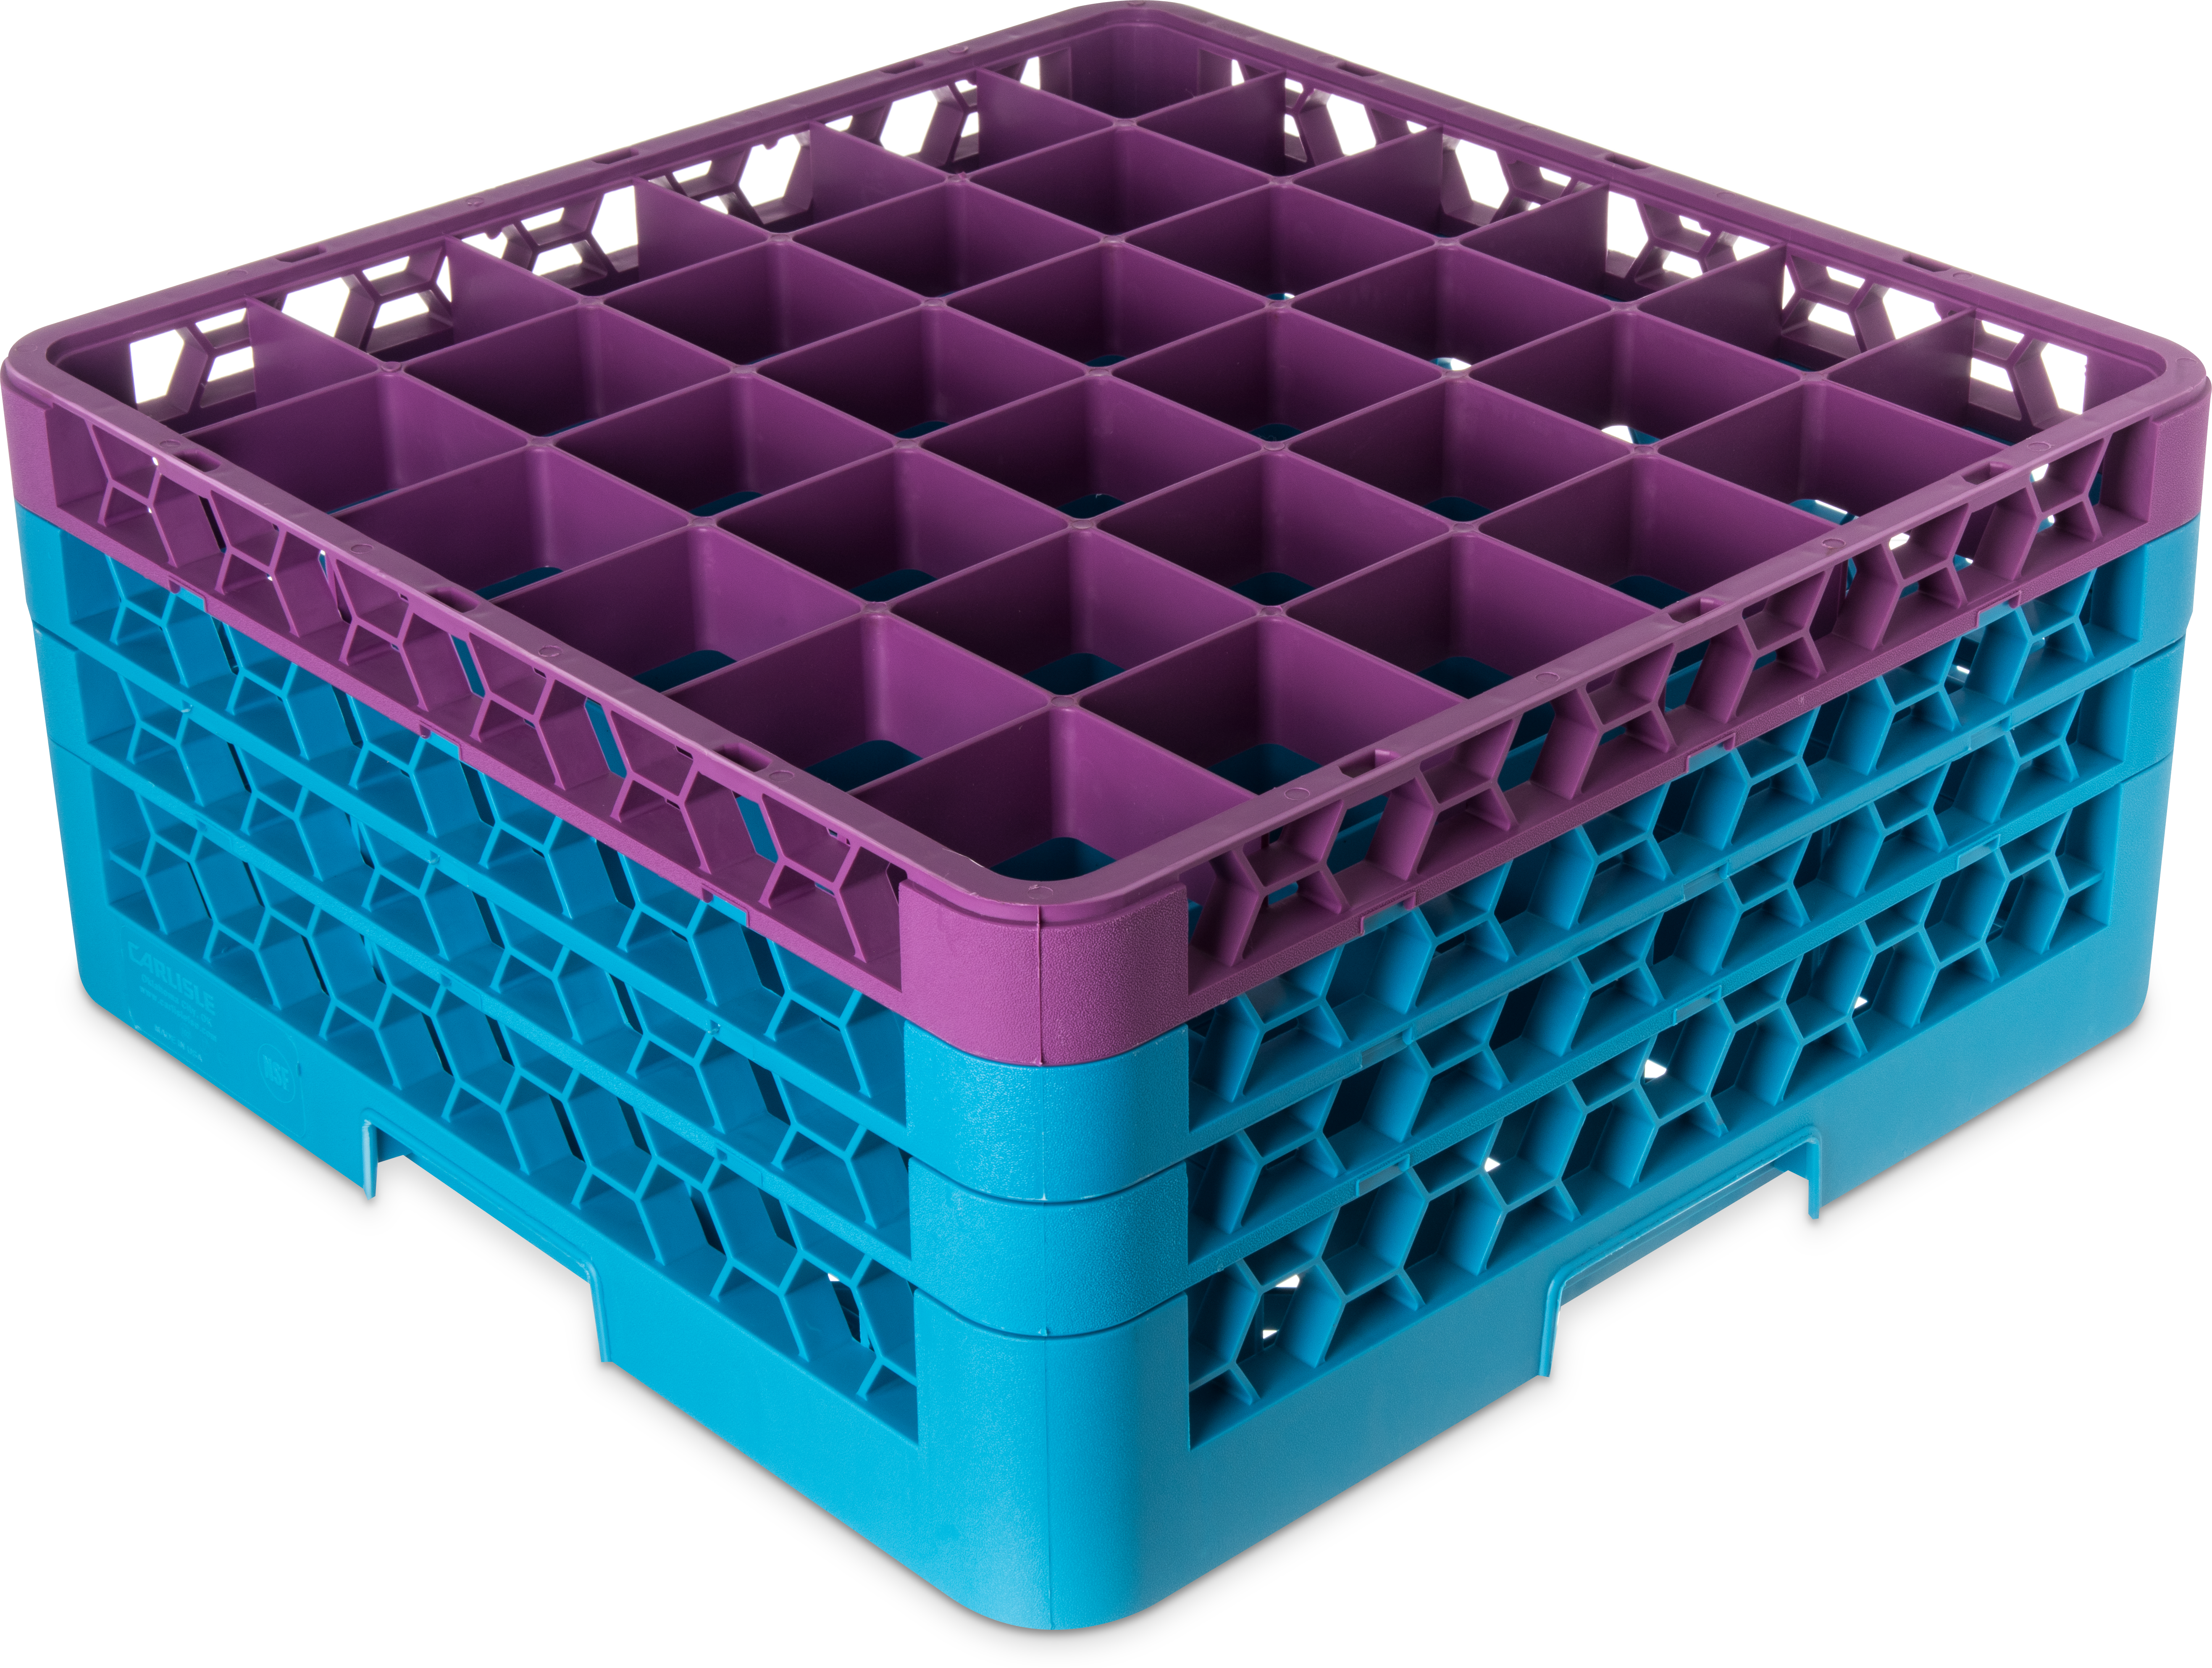 OptiClean 36 Compartment Glass Rack with 3 Extenders 8.72 - Lavender-Carlisle Blue